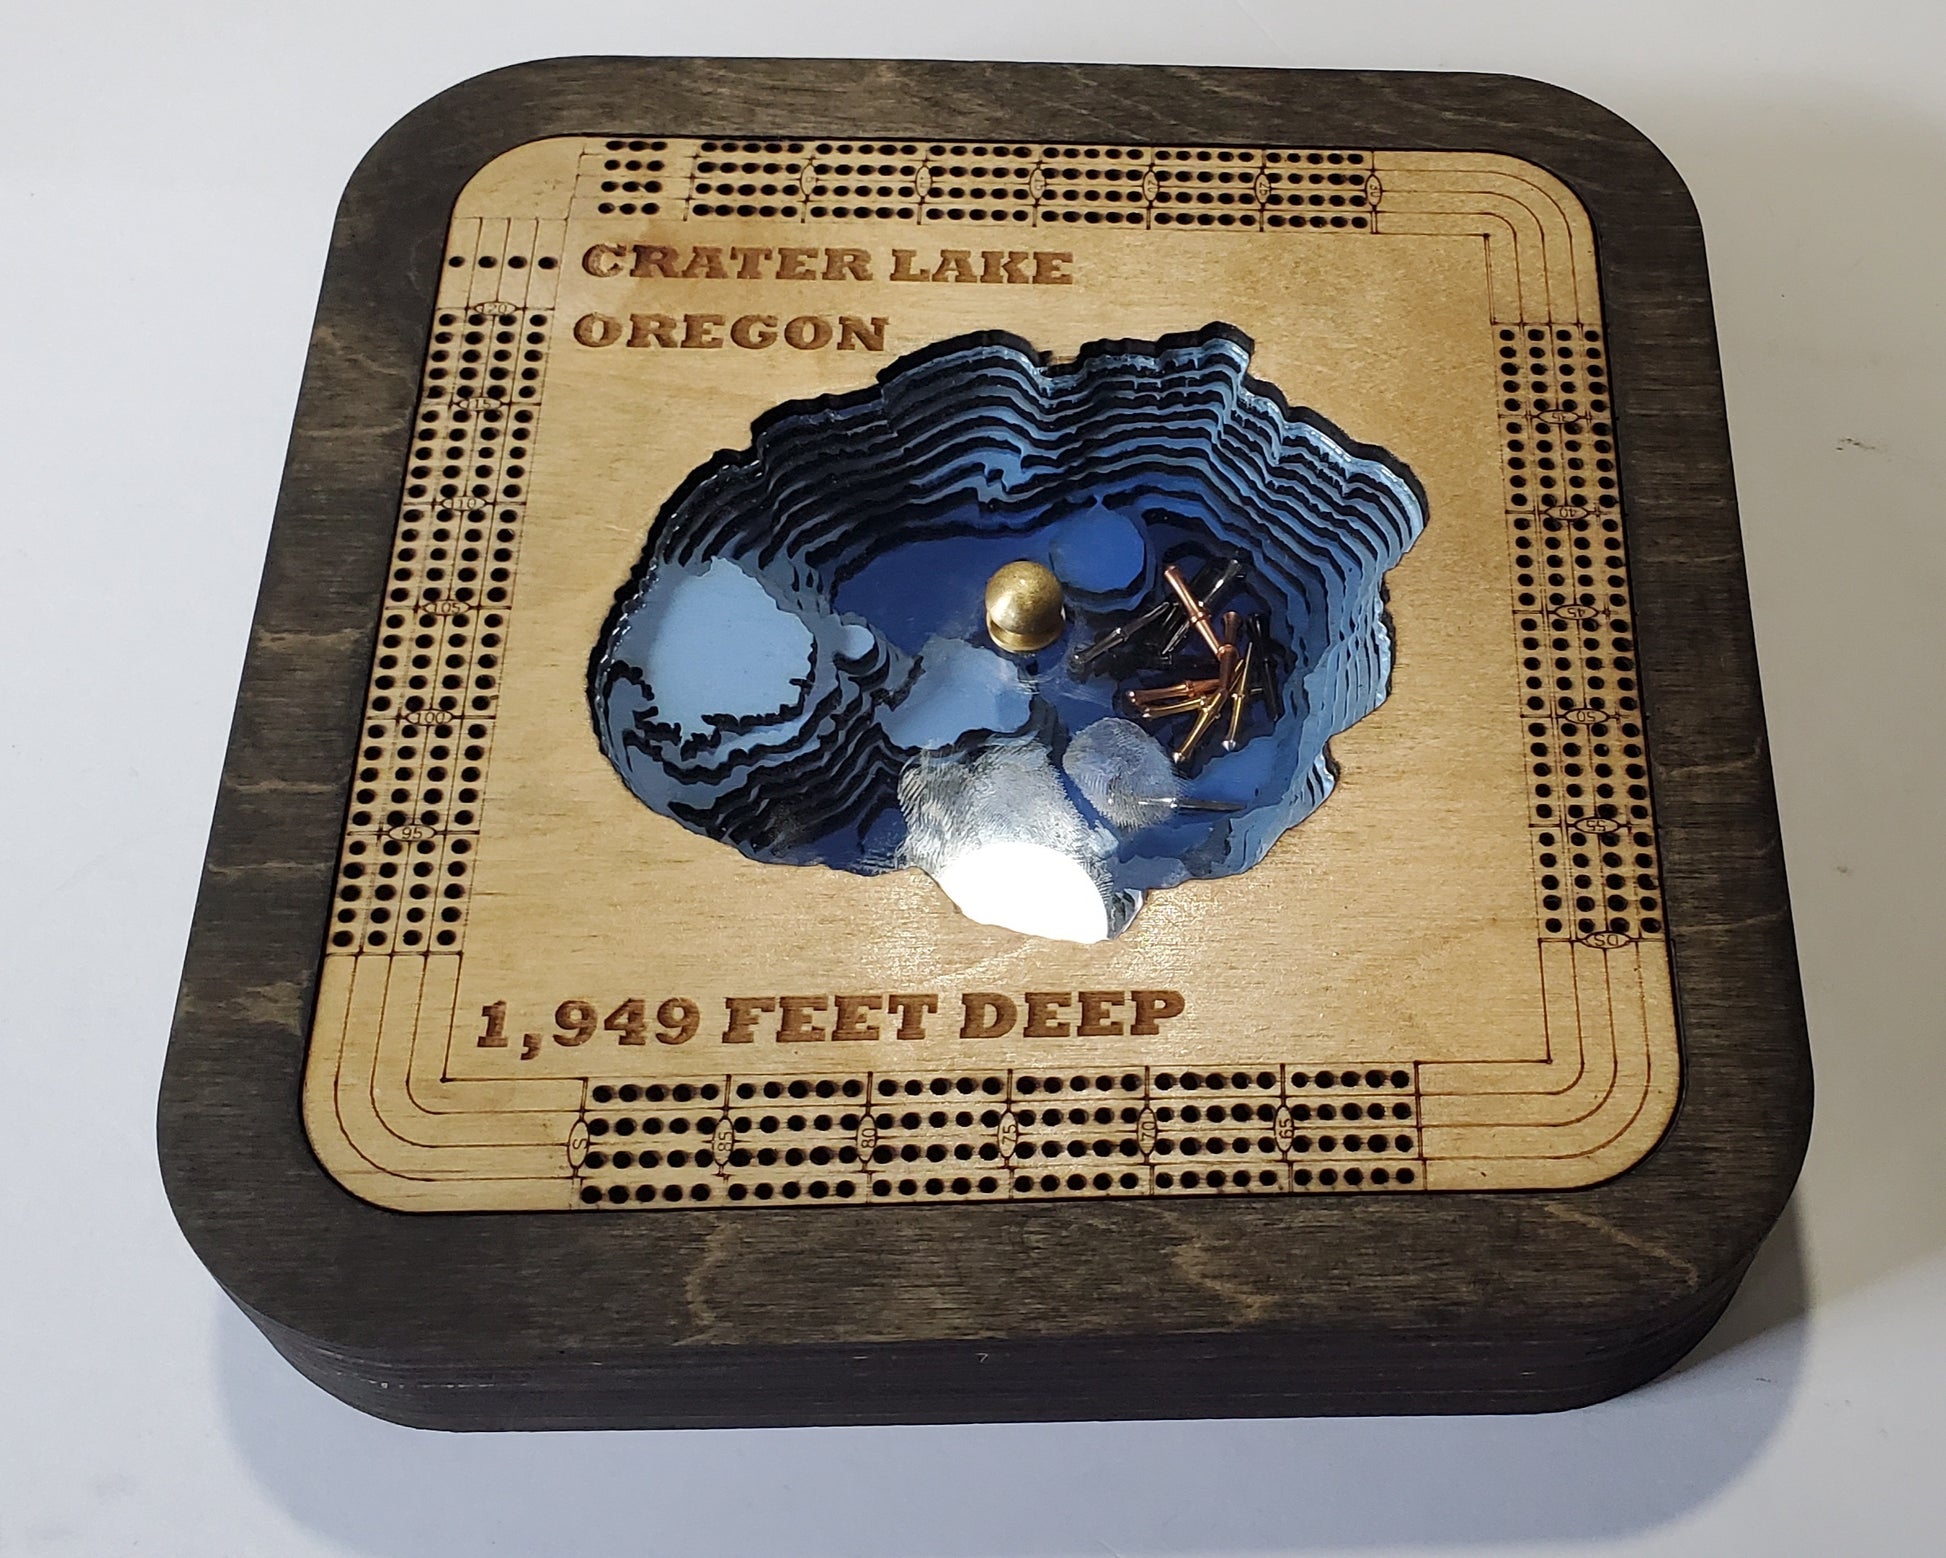 Multiple Layer Crater Lake Cribbage Board